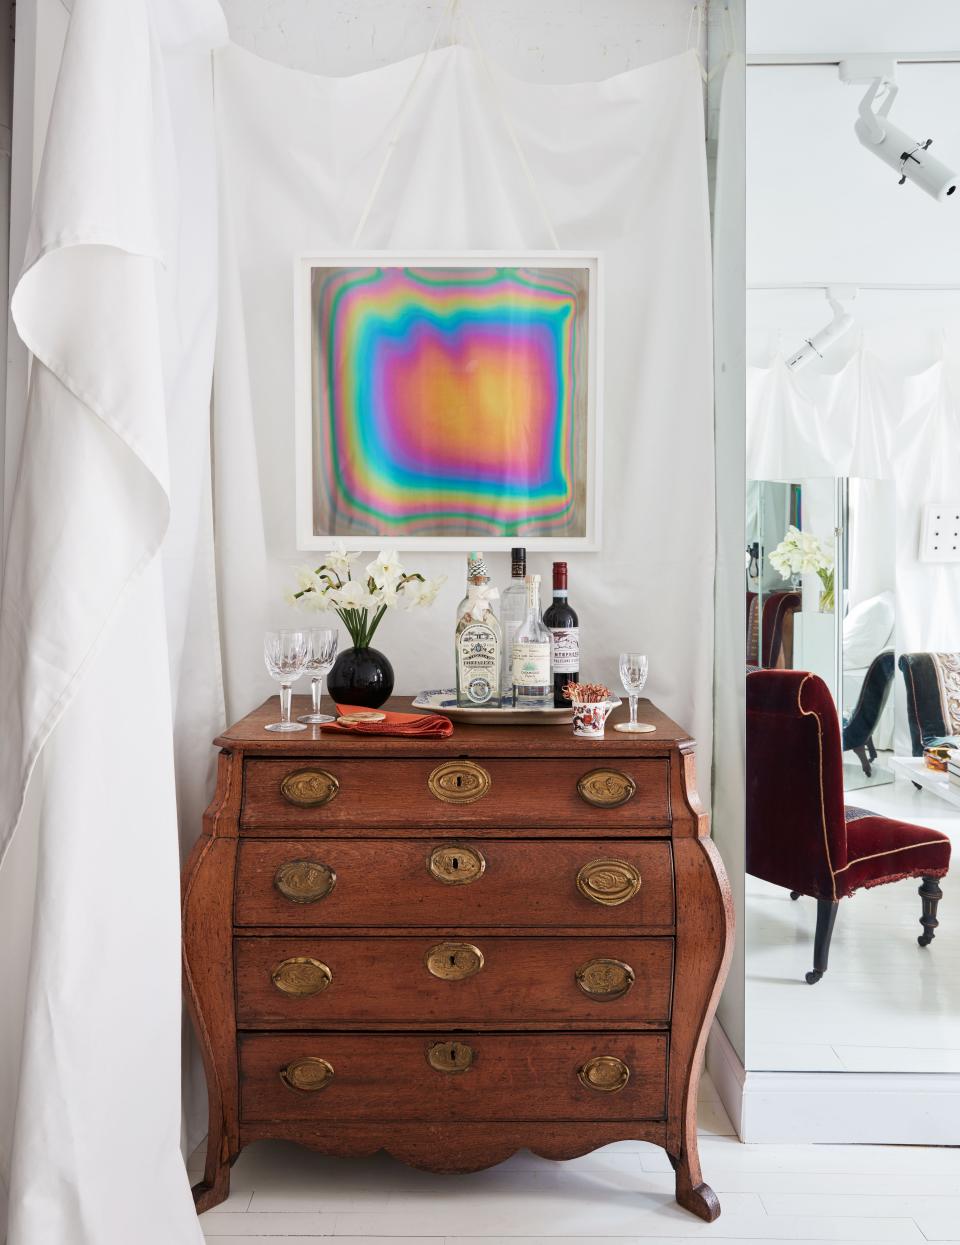 A framed artwork by Aleksandar Duravcevic hangs above the 18th-century chest.